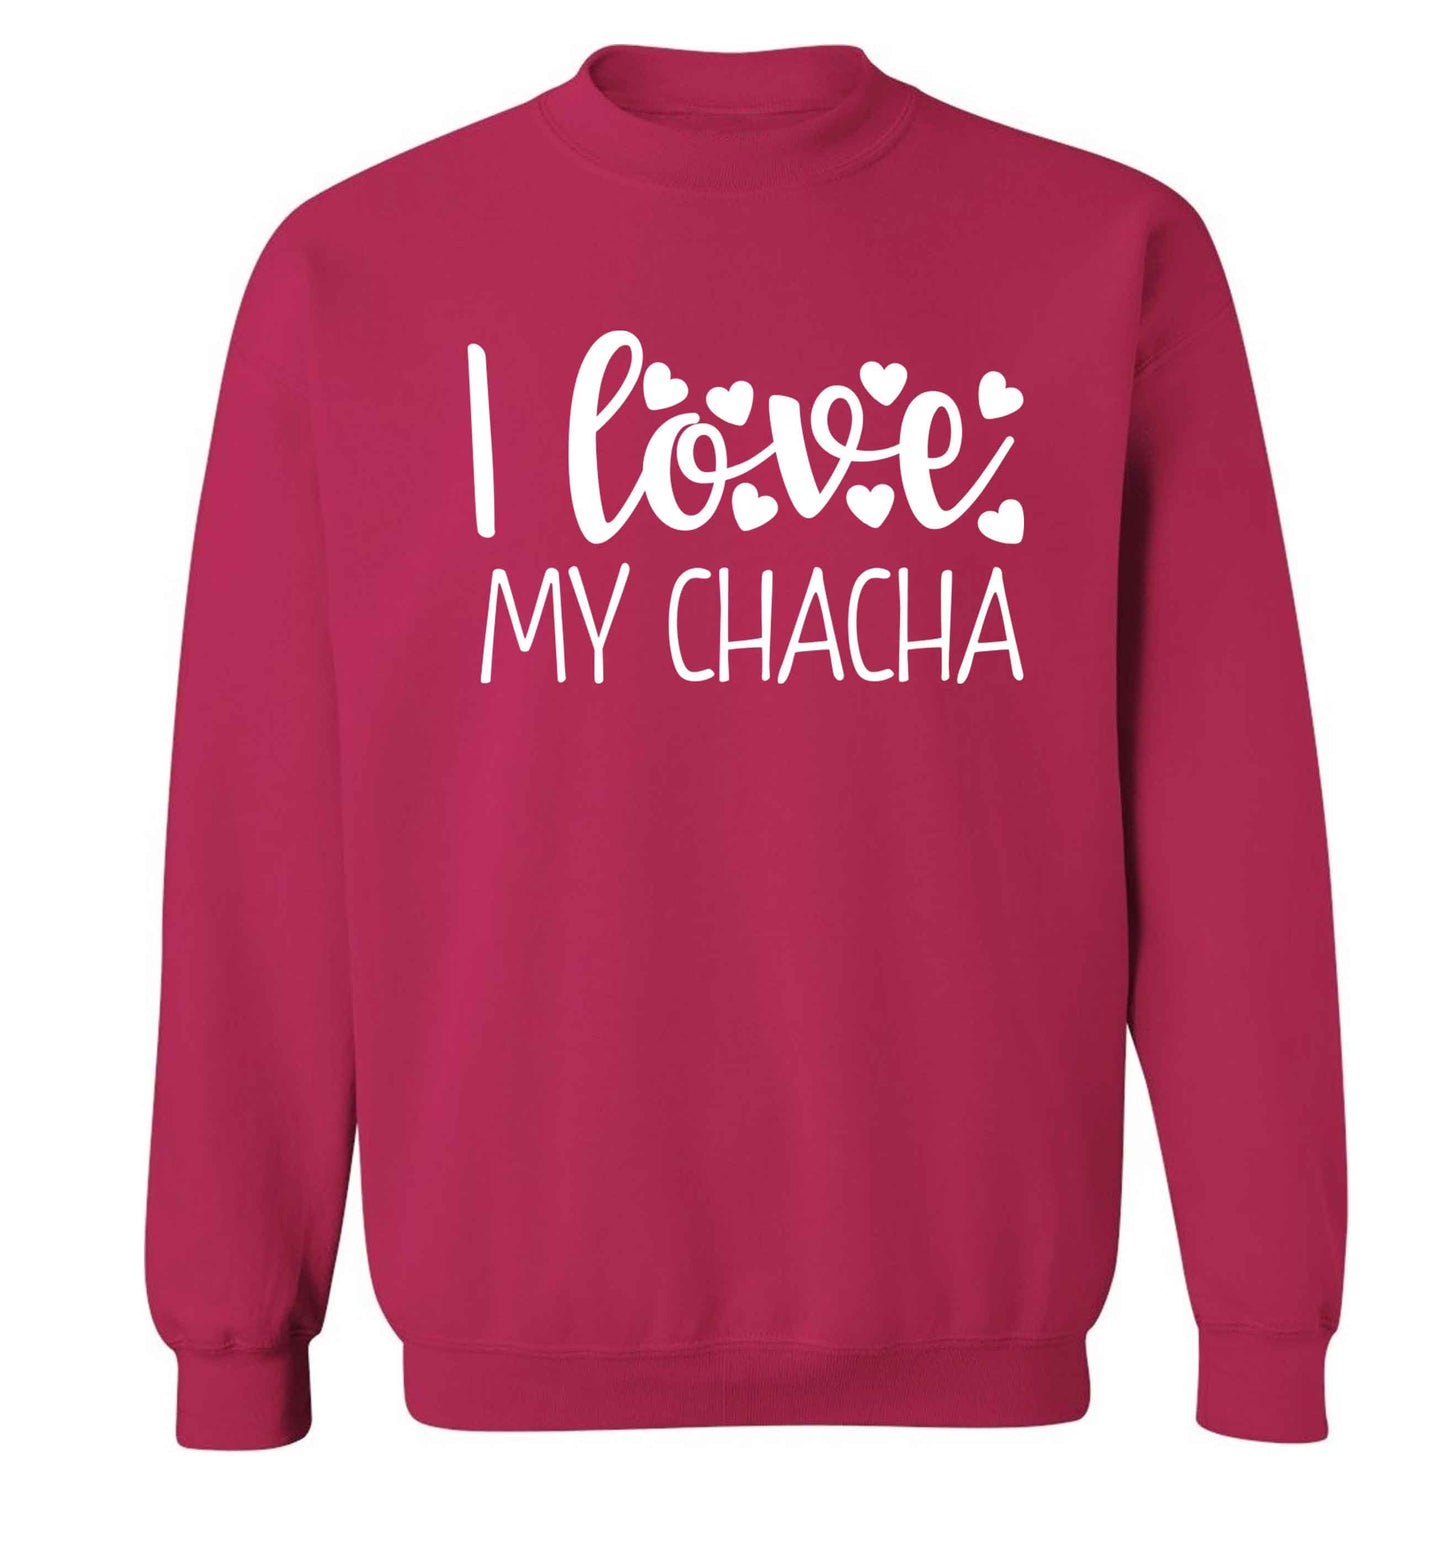 I love my chacha Adult's unisex pink Sweater 2XL